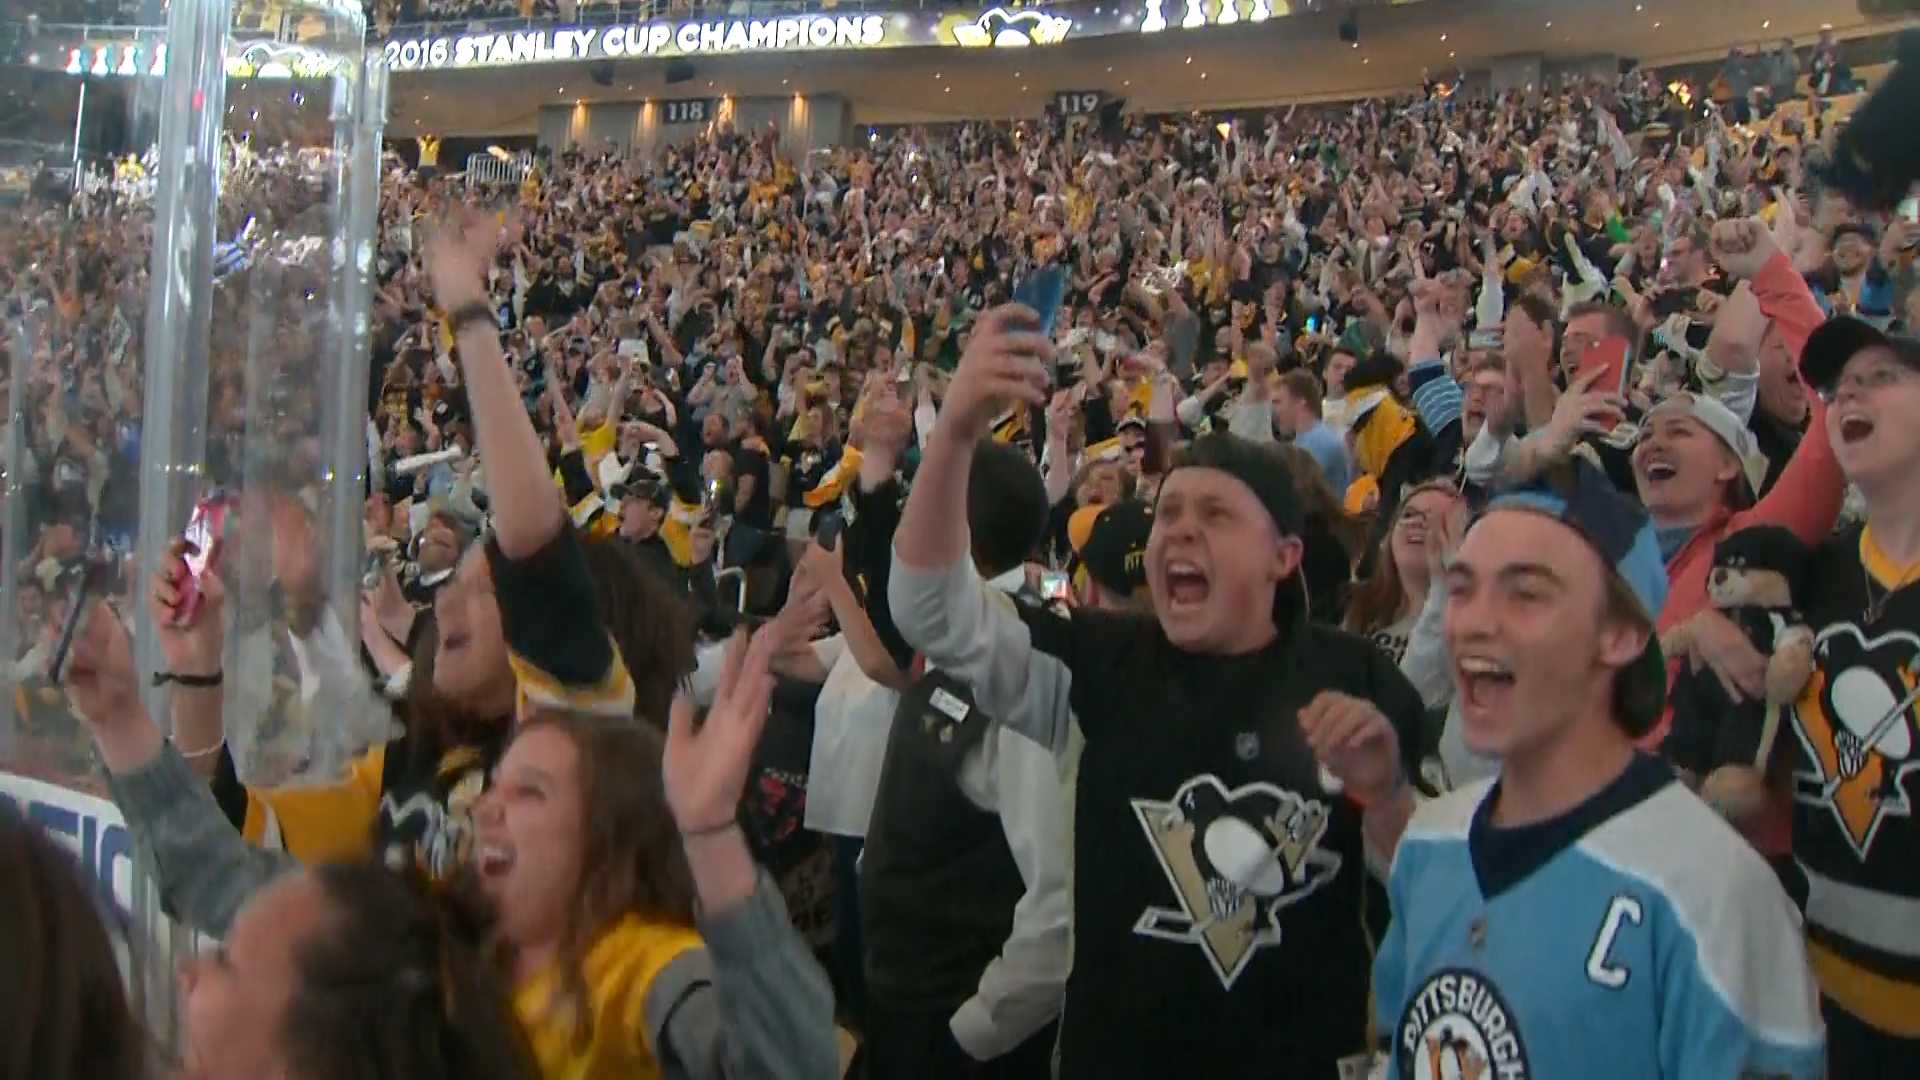 An arena wasnt enough Penguins adding big screen for Game 6